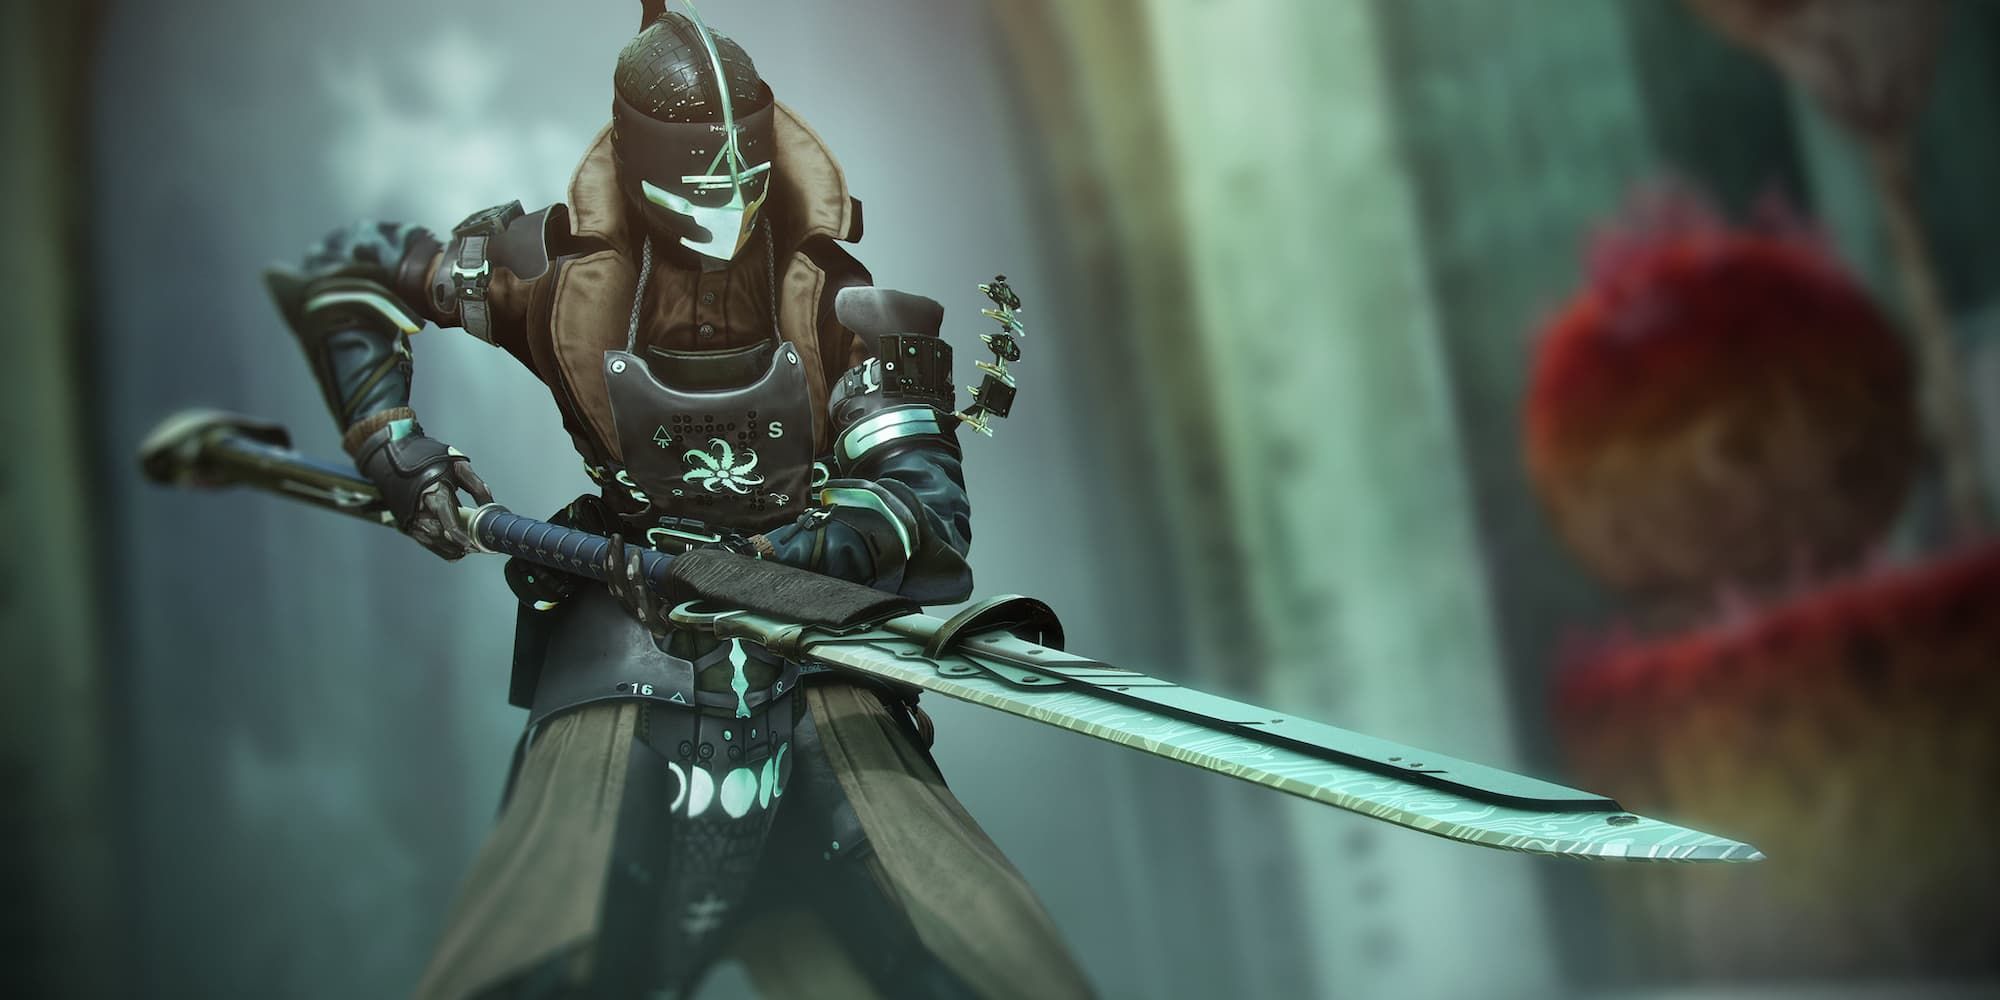 The Enigma, Destiny 2's first craftable glaive